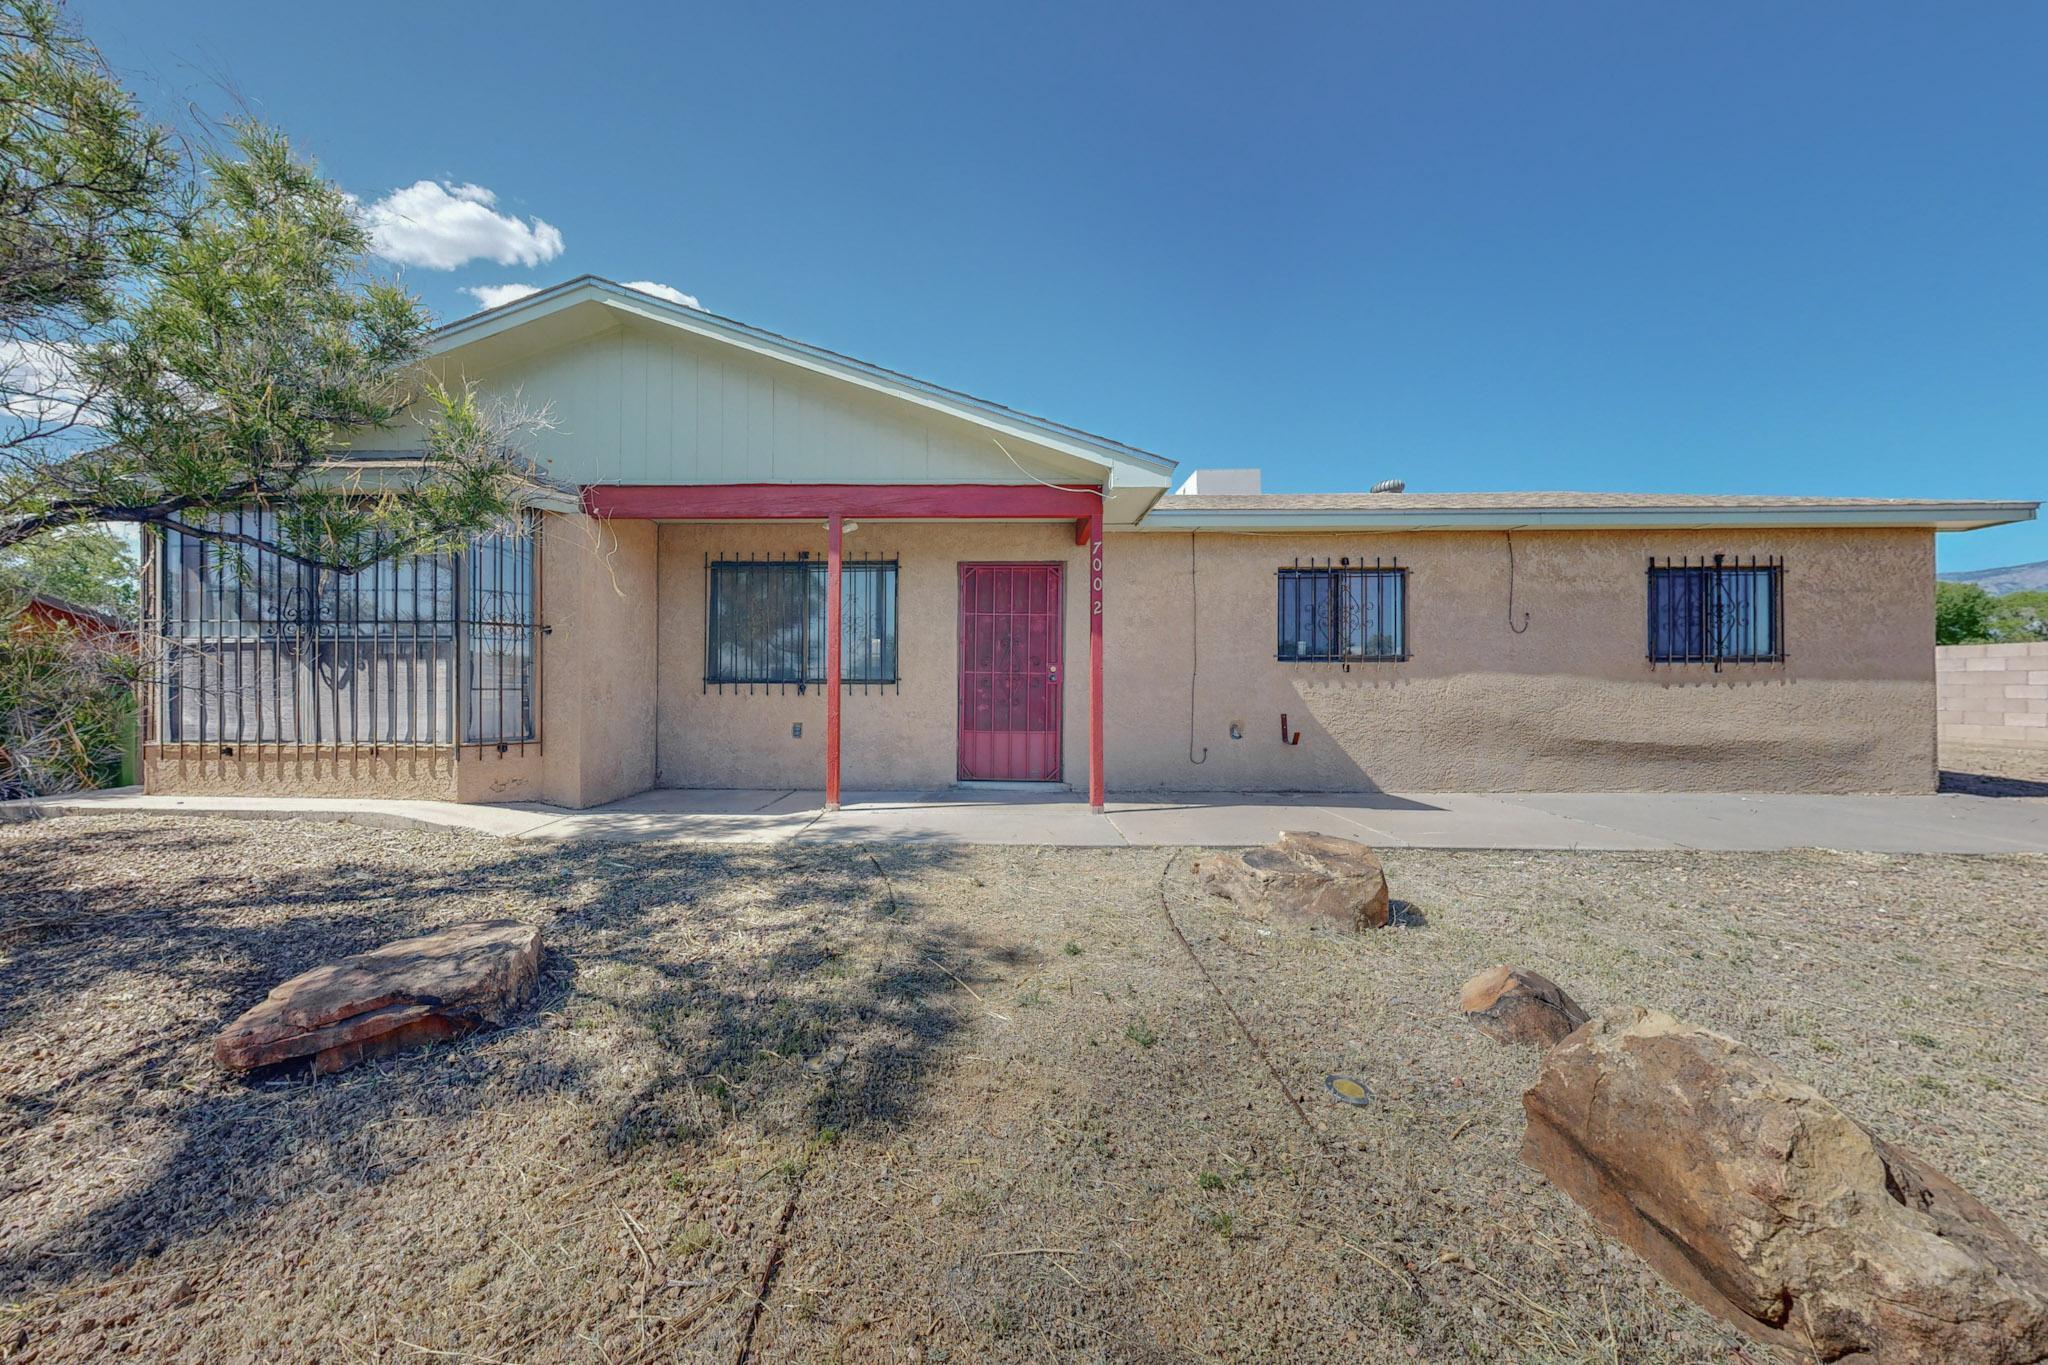 Welcome to your next investment opportunity located in the North Valley! Situated on a large .53, fully fenced lot with 3 bedrooms & 2 baths, this property offers the perfect canvas for your vision.